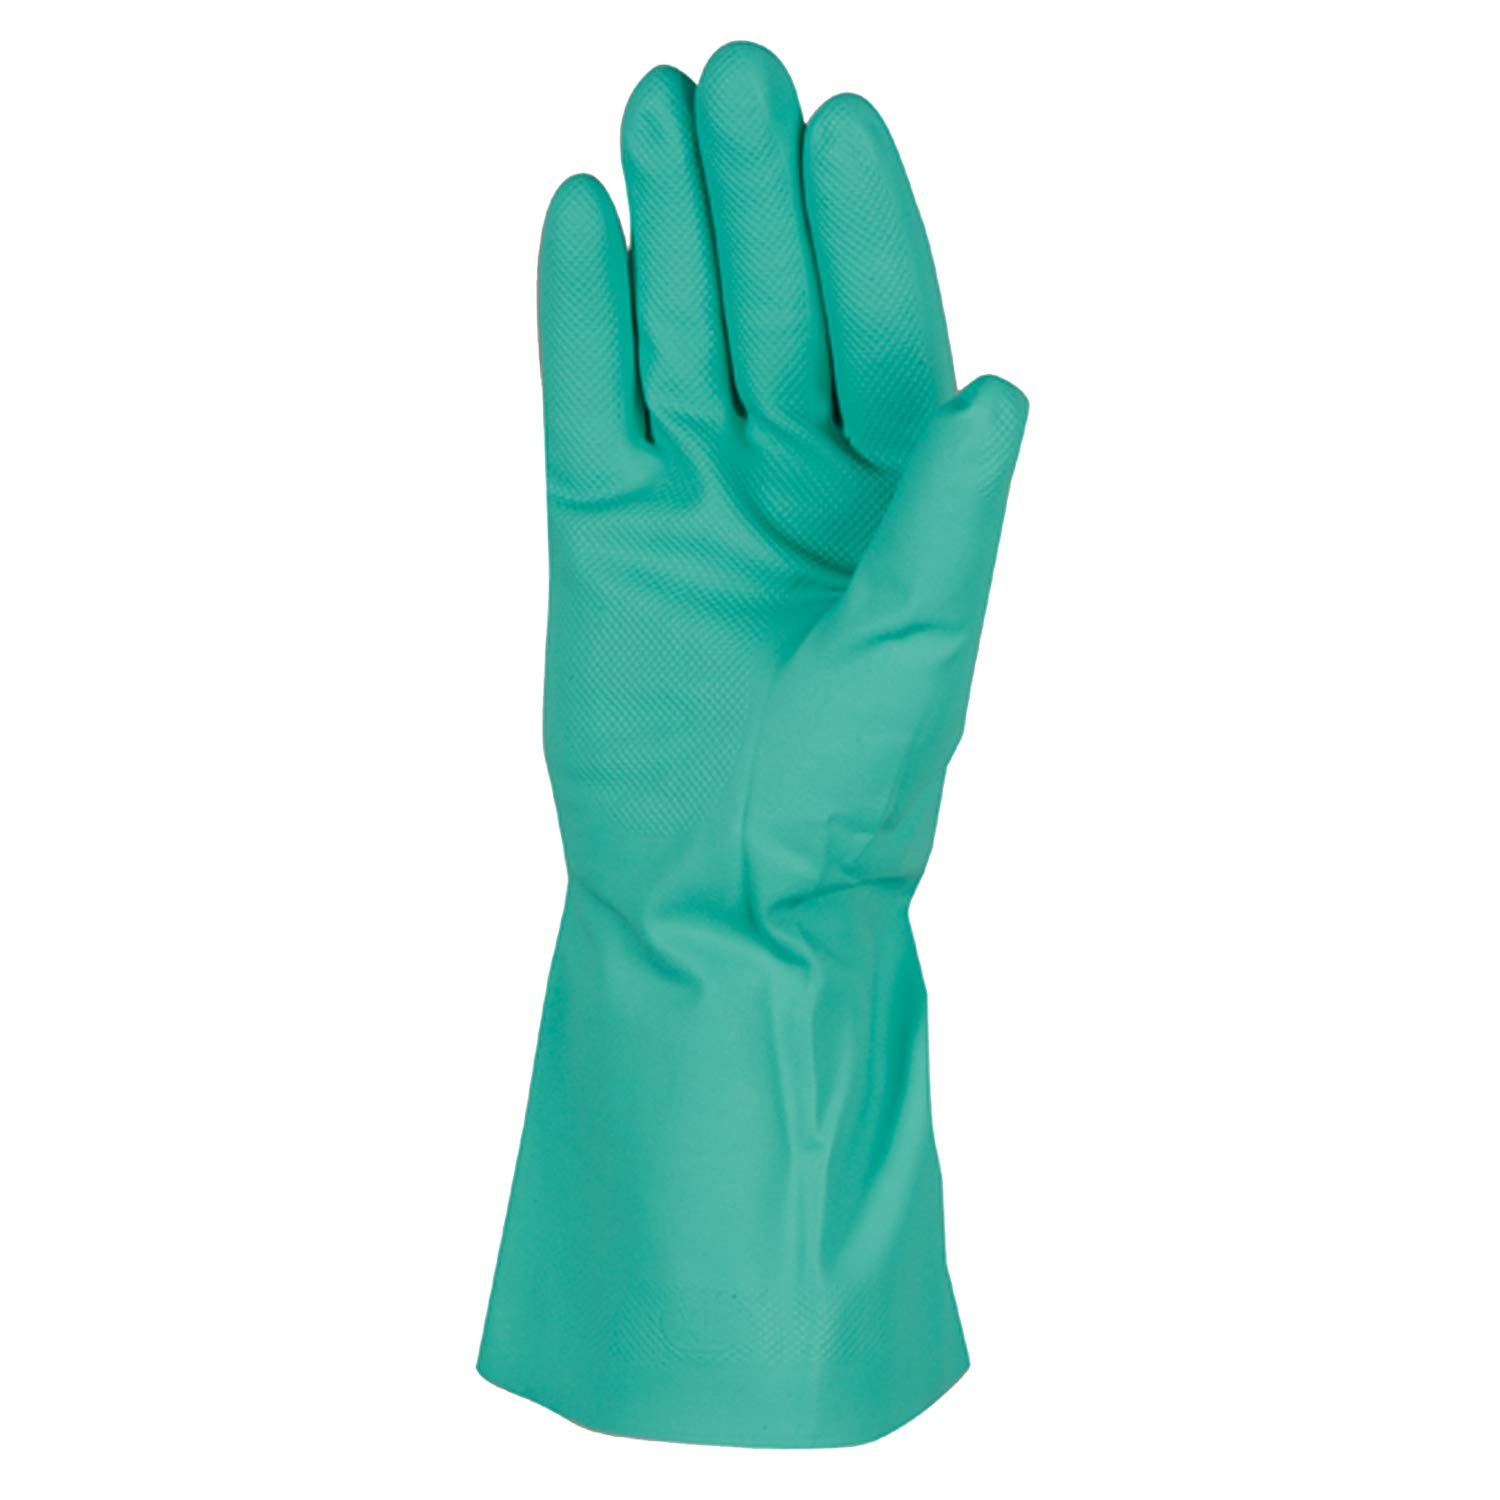 Chemical Resistant Nitrile Gloves,  Solvent and Pesticide Resistant, Reusable, Large (Wells Lamont 178L) , Green